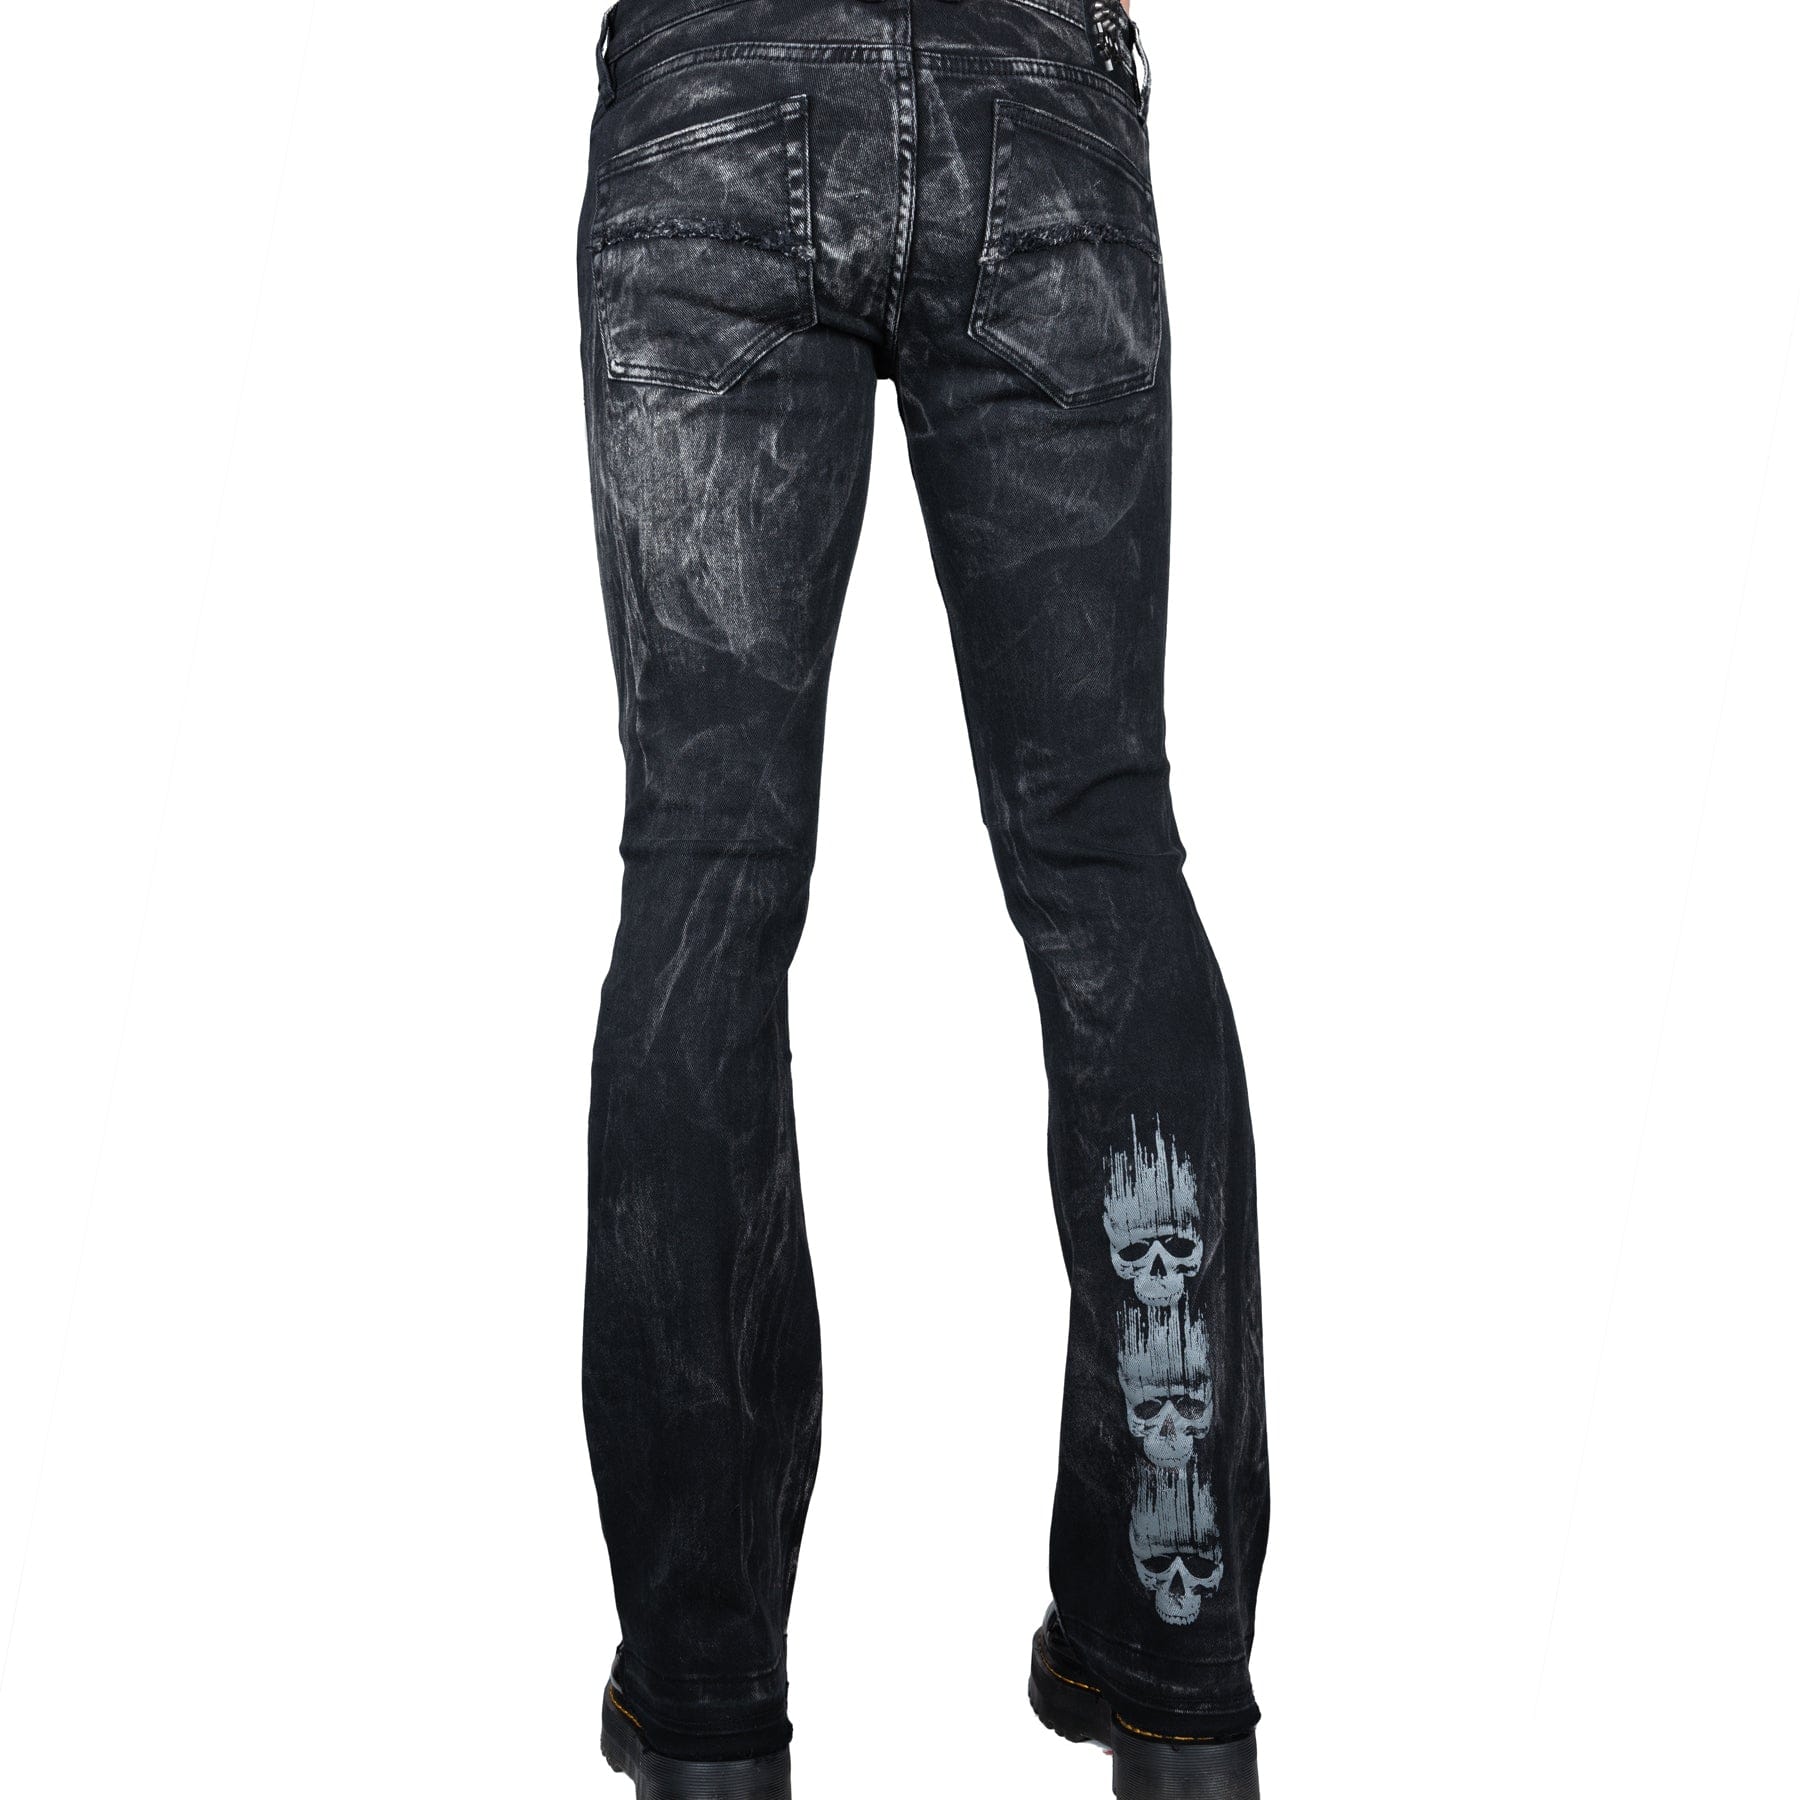 All Access Collection Pants Headhunter Jeans